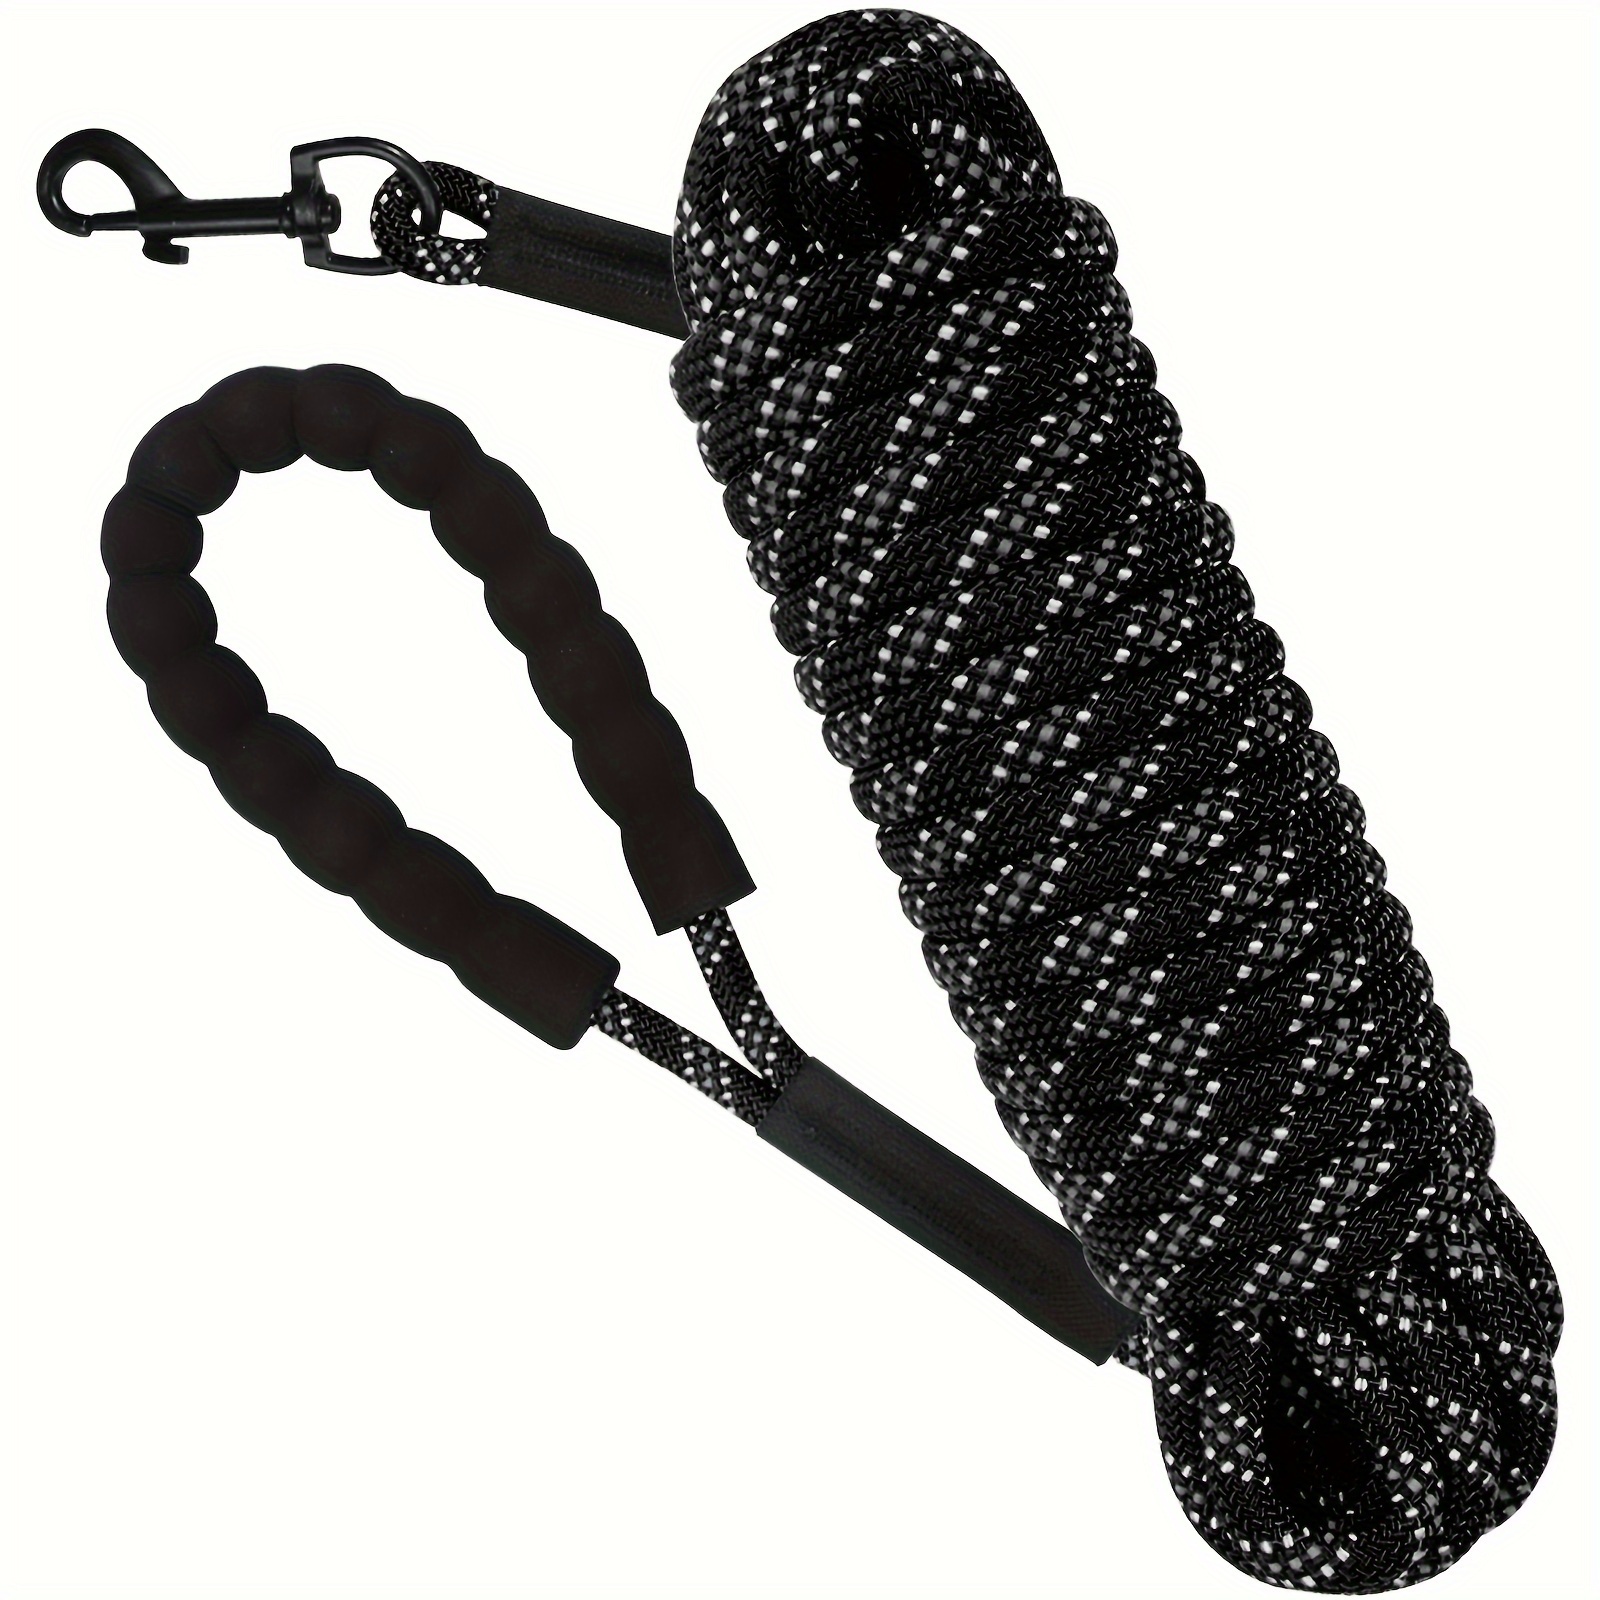 Dog Leash,5 FT Heavy Duty Double Handle Dog Leash with Comfortable Padded  and Reflective,Rope Dog Leashes for Small,Medium,Large Dogs (Wide-Black)